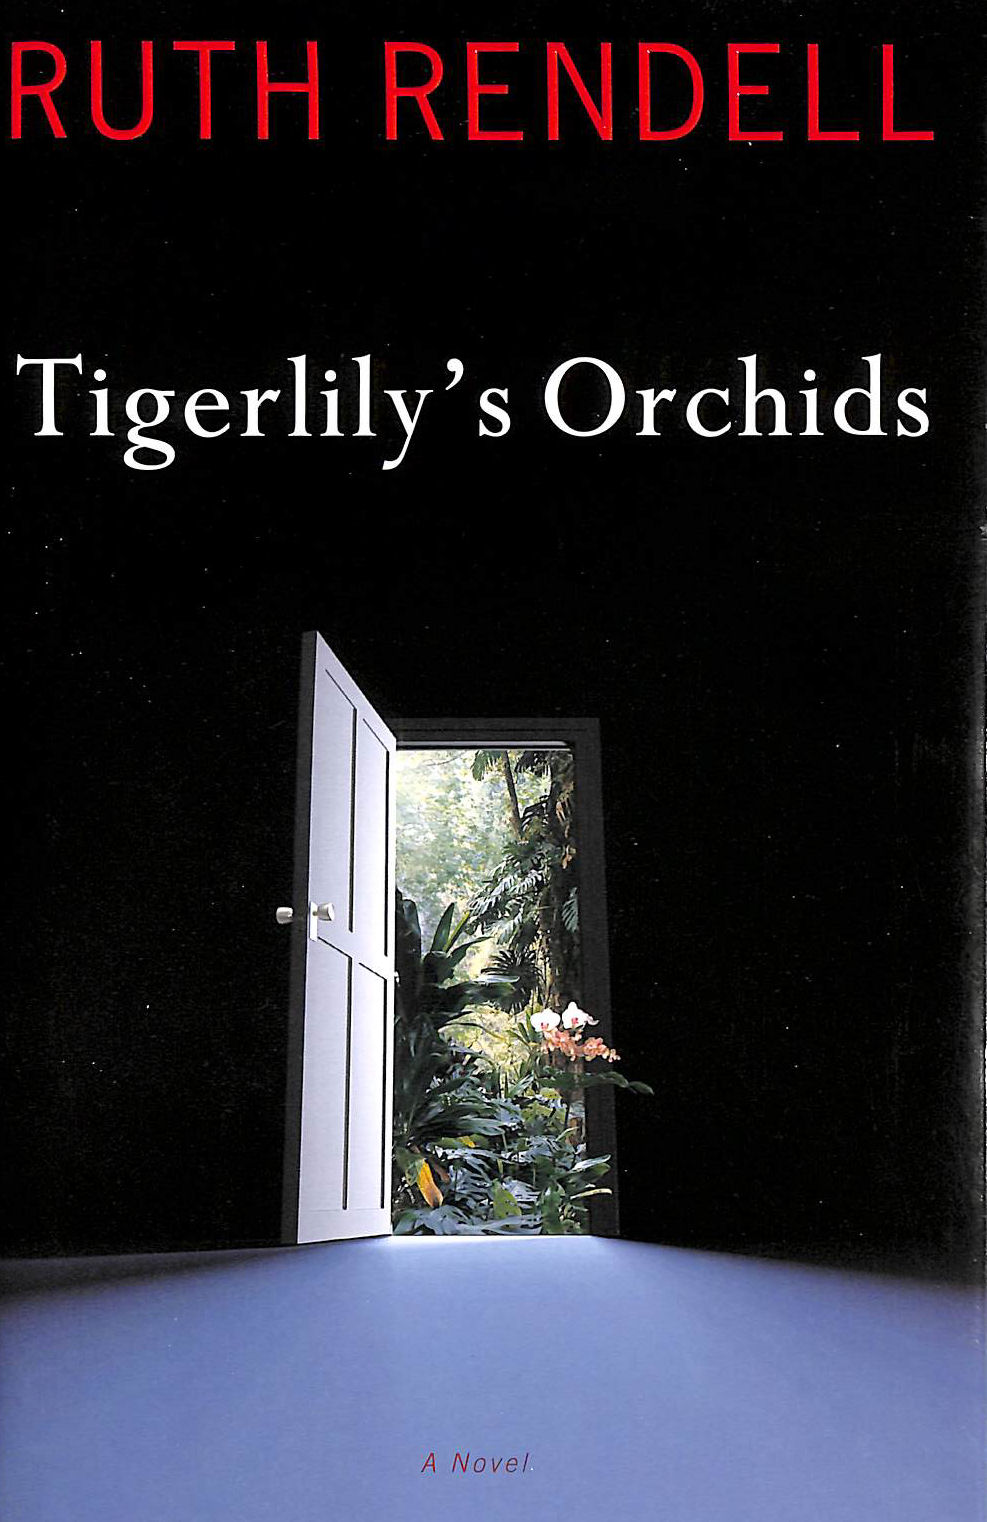 RENDELL, RUTH - Tigerlily's Orchids